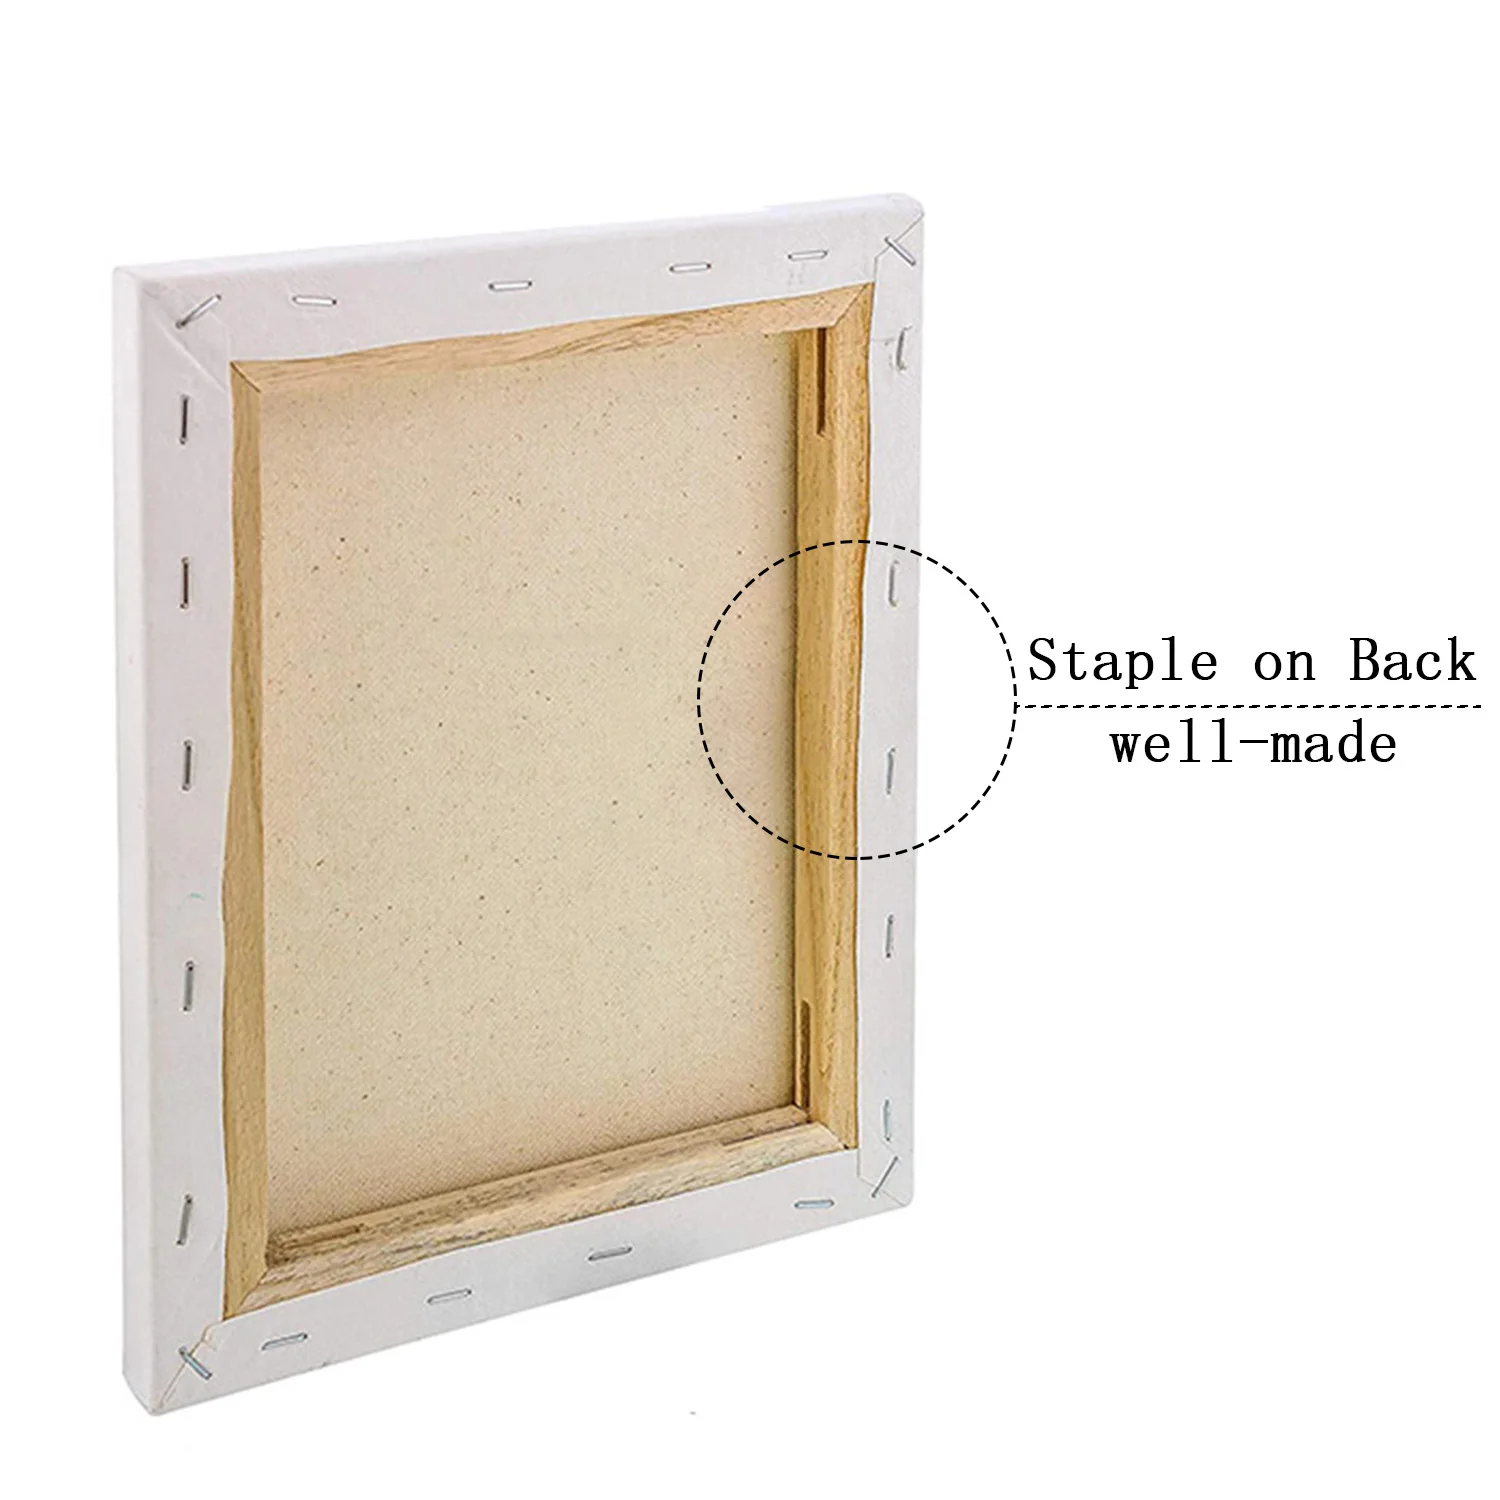 280g cotton blank canvas wooden picture frame various sizes of artist painting stretched canvas